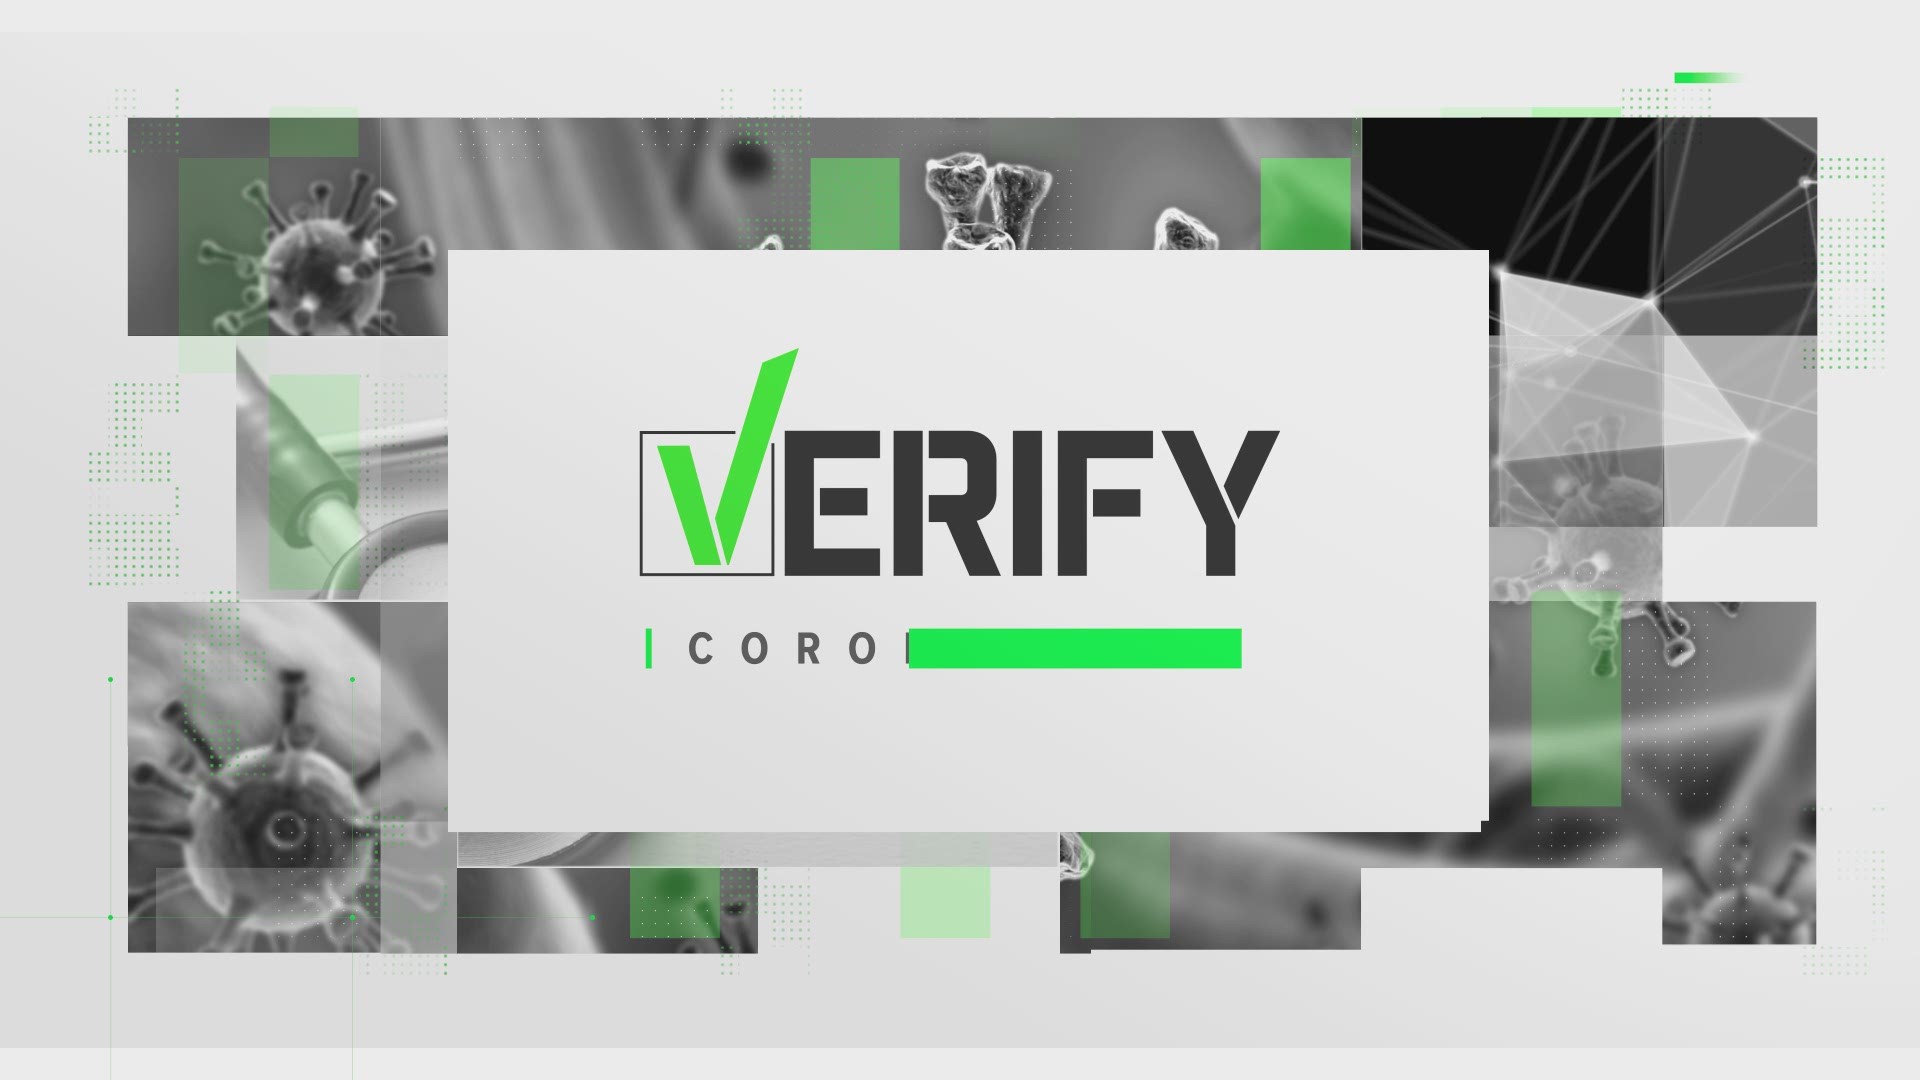 The VERIFY Team looked into what residents of DC, Maryland, and Virginia should do if they lose their vaccination record card.